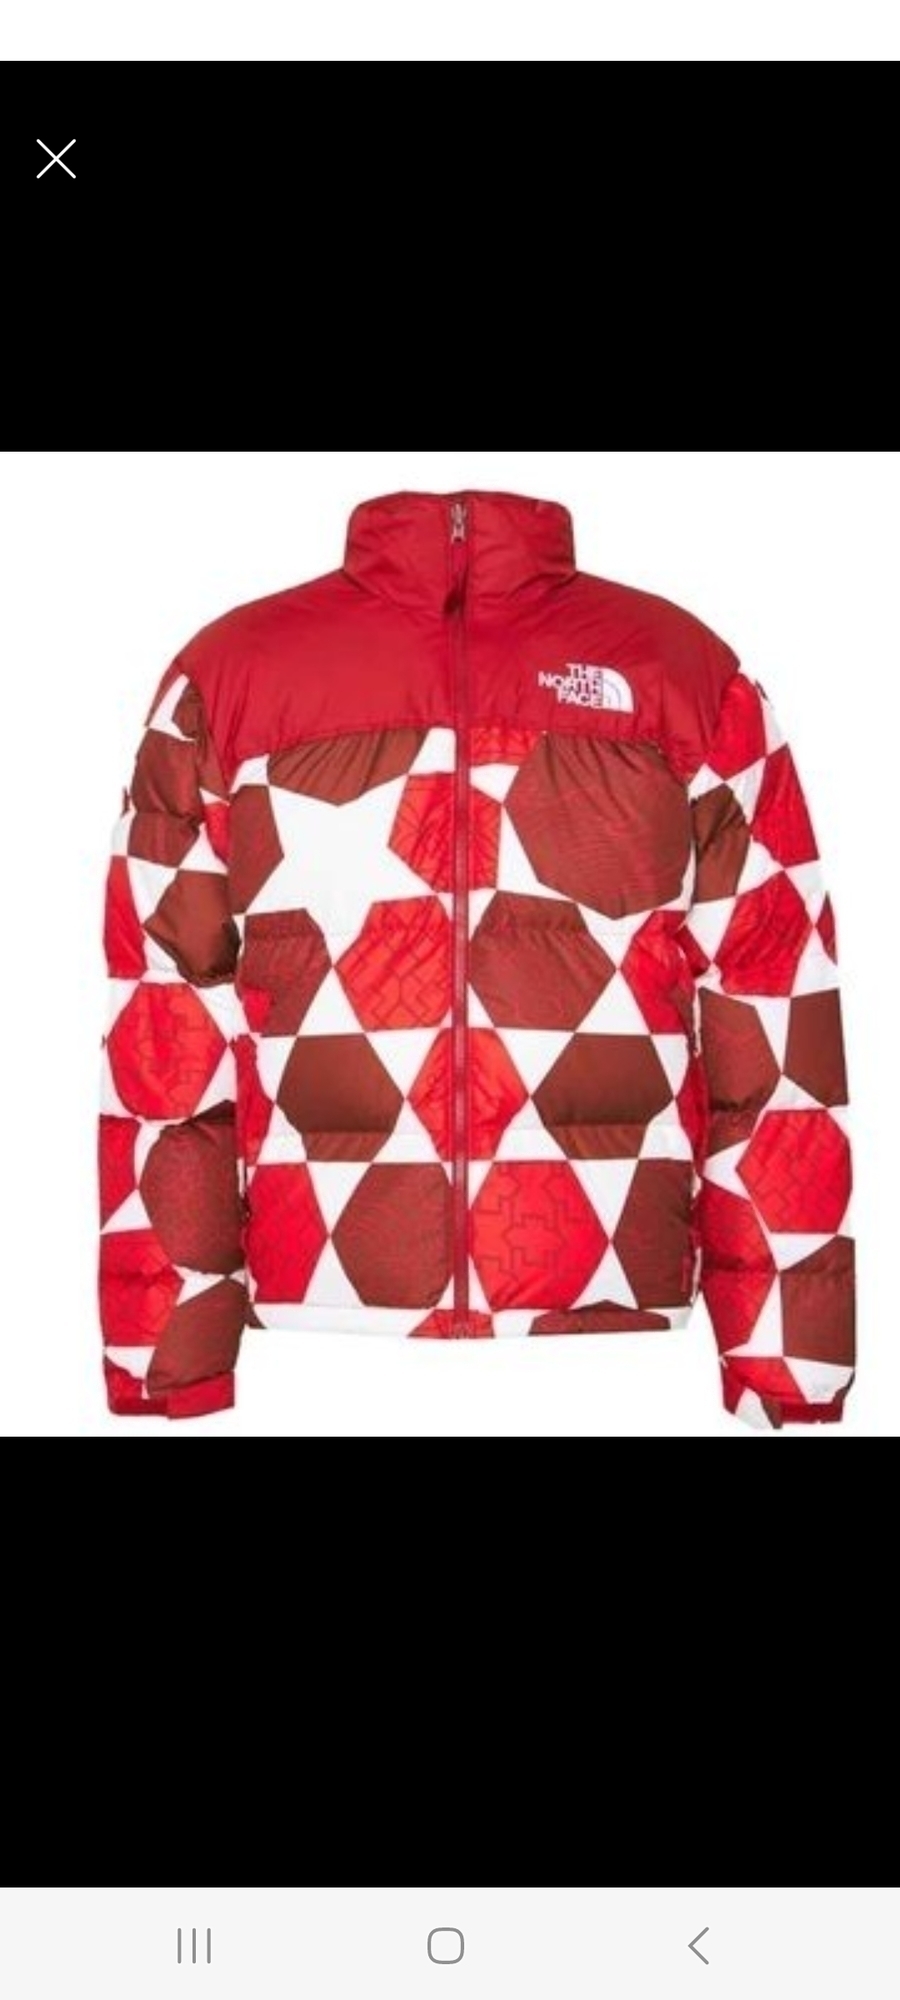 North face 1996 retro print red jacket size M 4